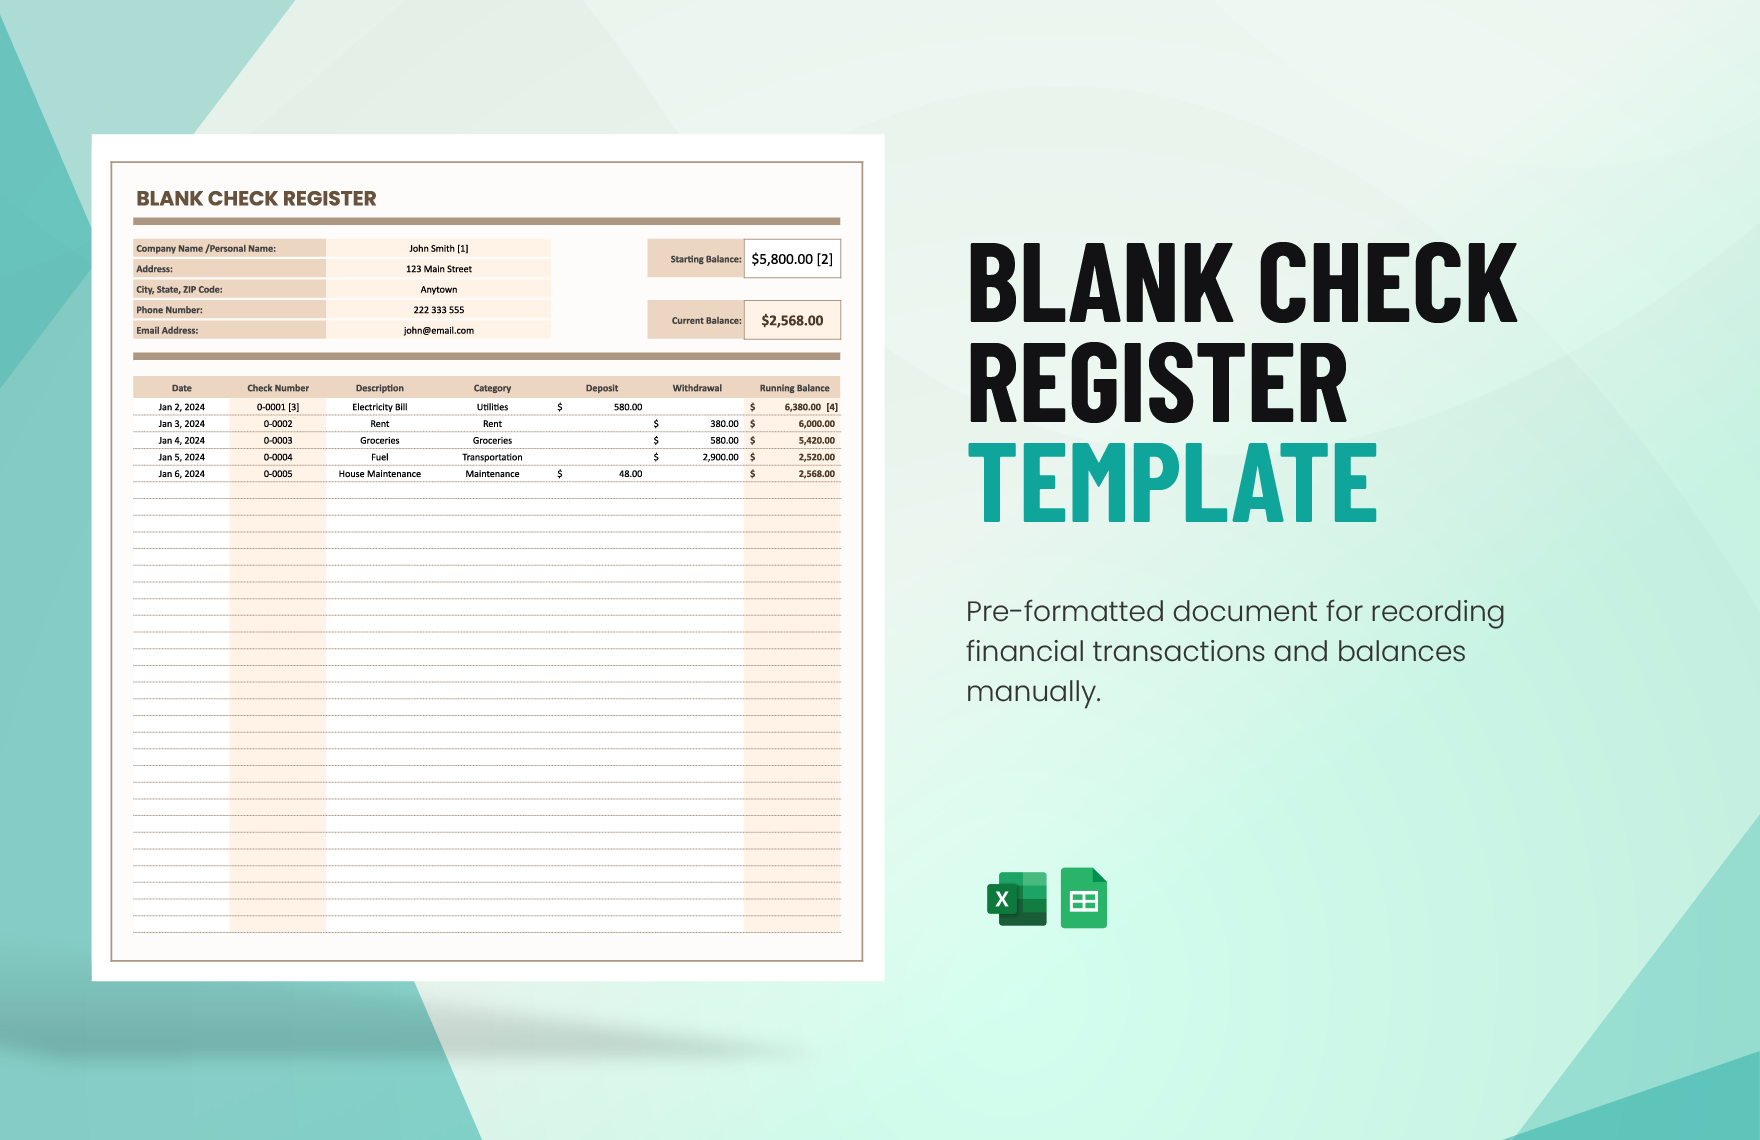 Blank Check Register Template in Excel, Google Sheets